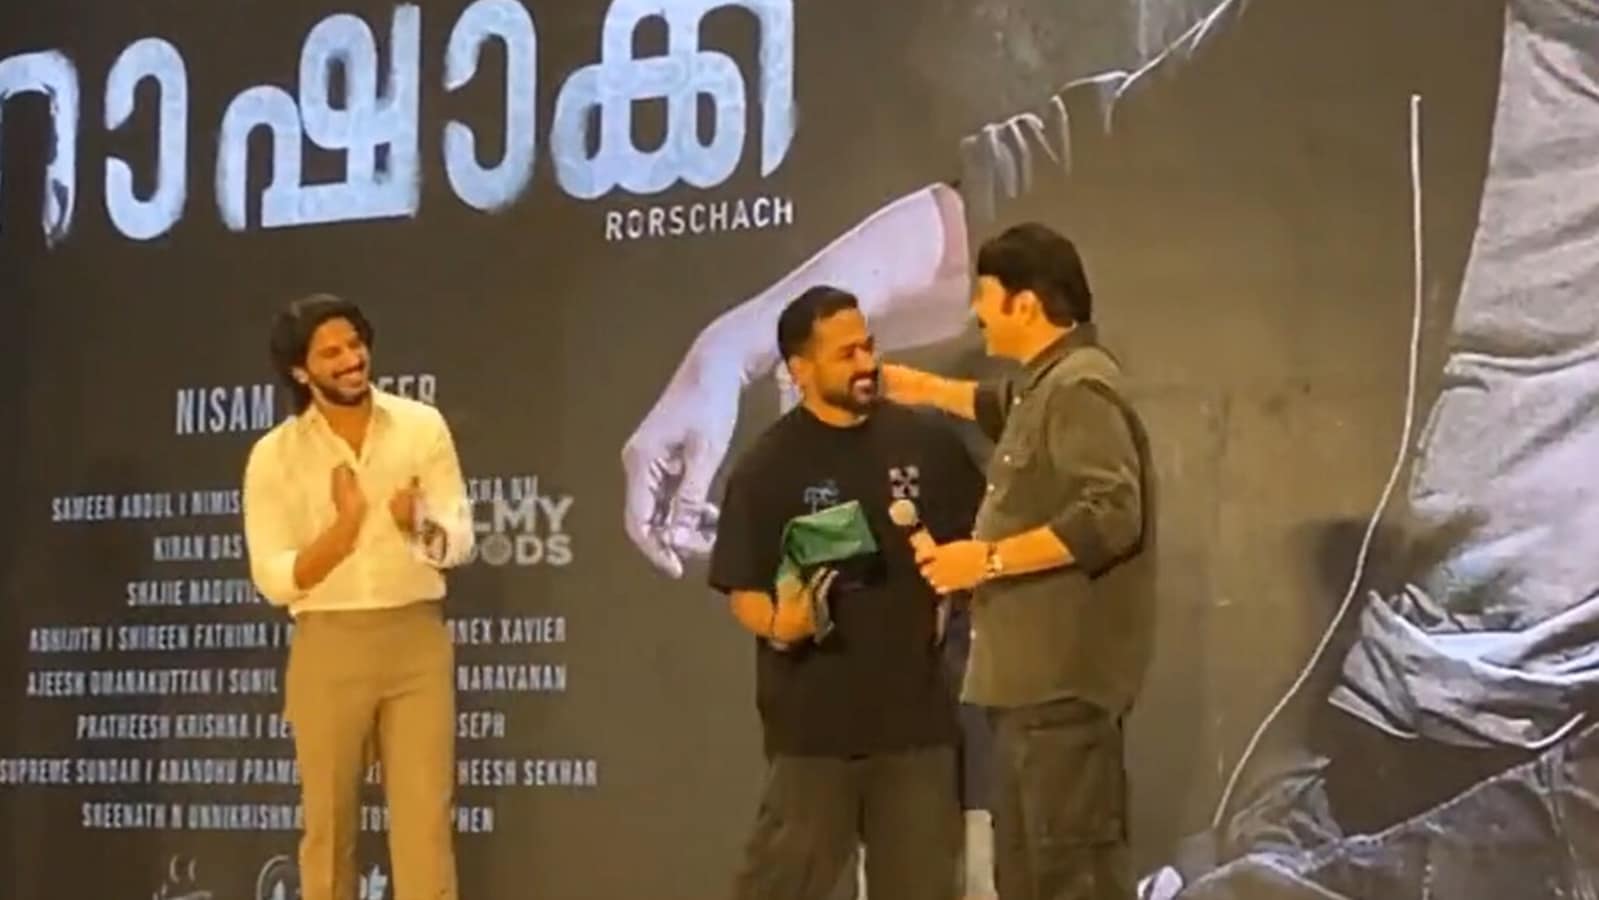 Mammootty gifts Rolex watch to Asif Ali at Rorschach success meet, mentions Kamal Haasan’s Rolex gift to Suriya